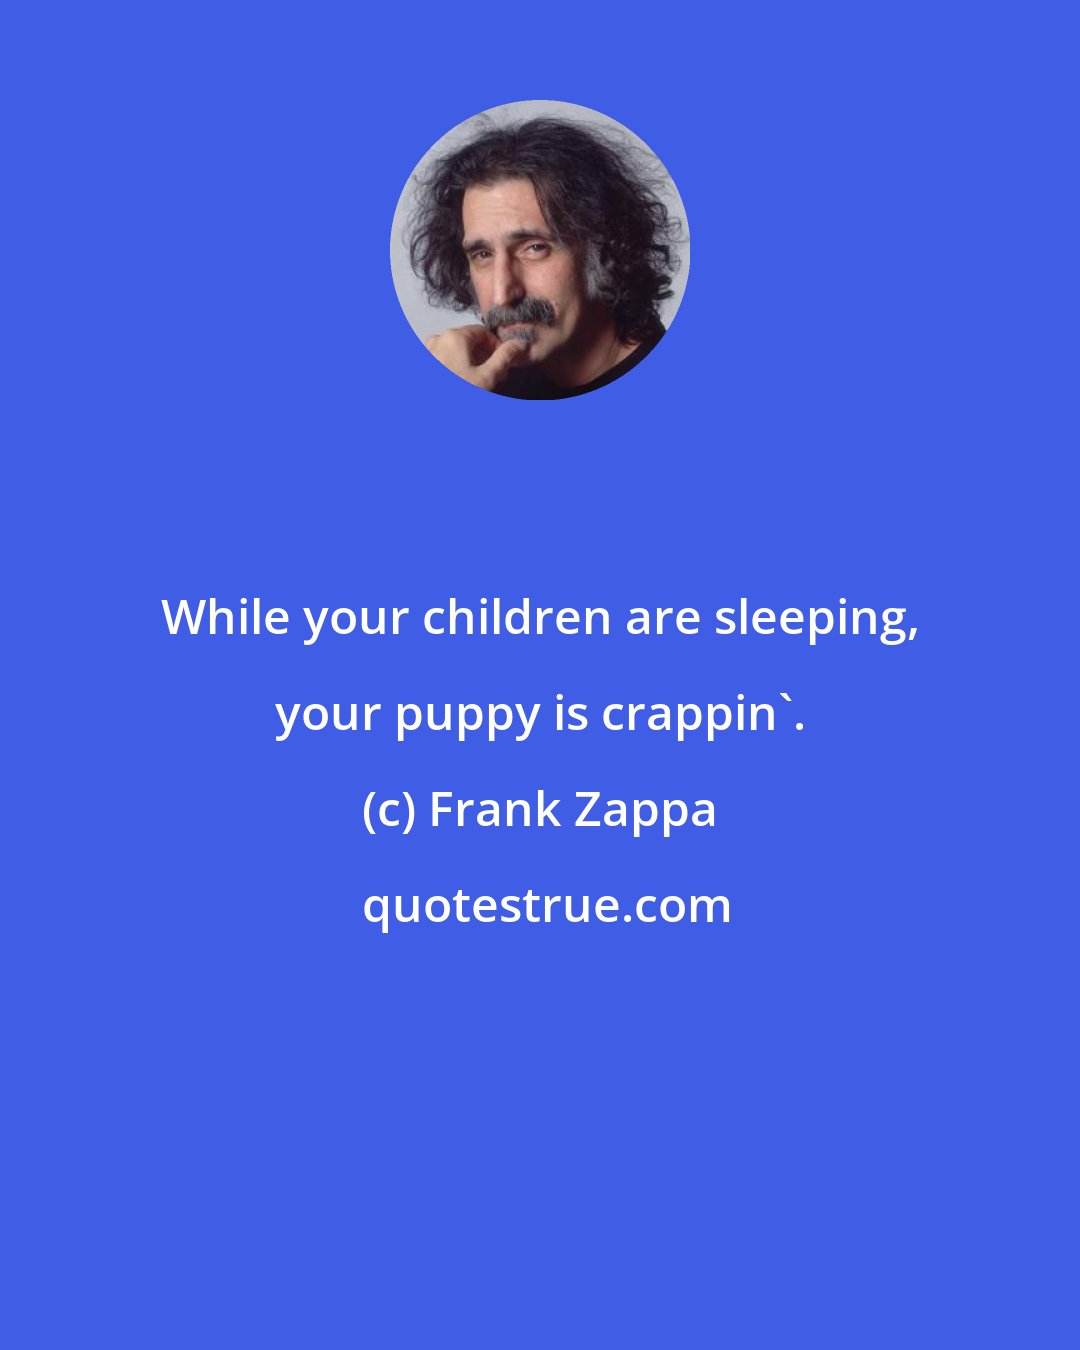 Frank Zappa: While your children are sleeping, your puppy is crappin'.